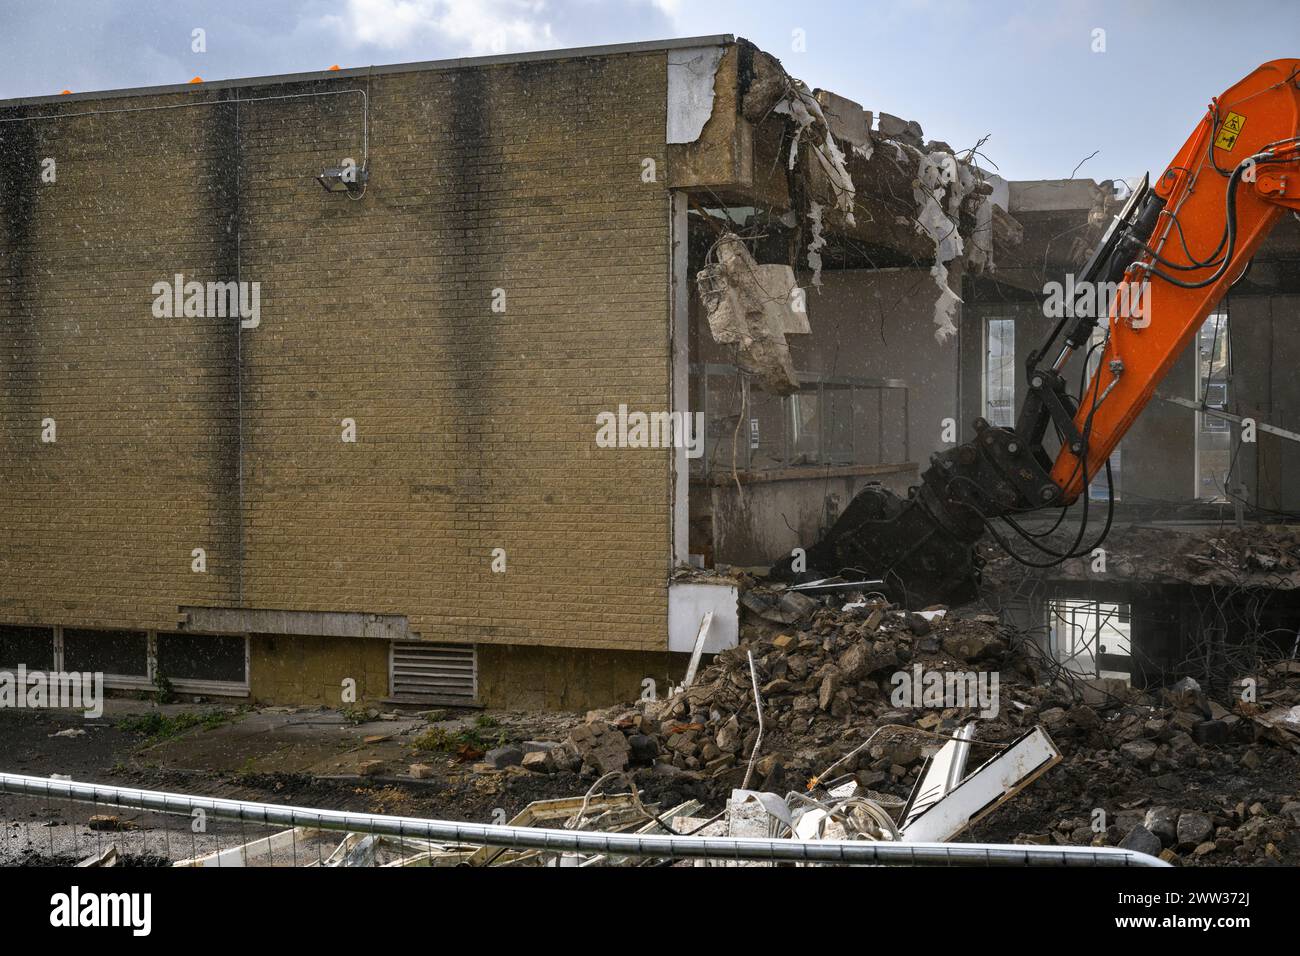 Demolition site (rubble, heavy machinery, building deconstruction, controlled collapse, empty shell) - Baildon library, West Yorkshire, England, UK. Stock Photo